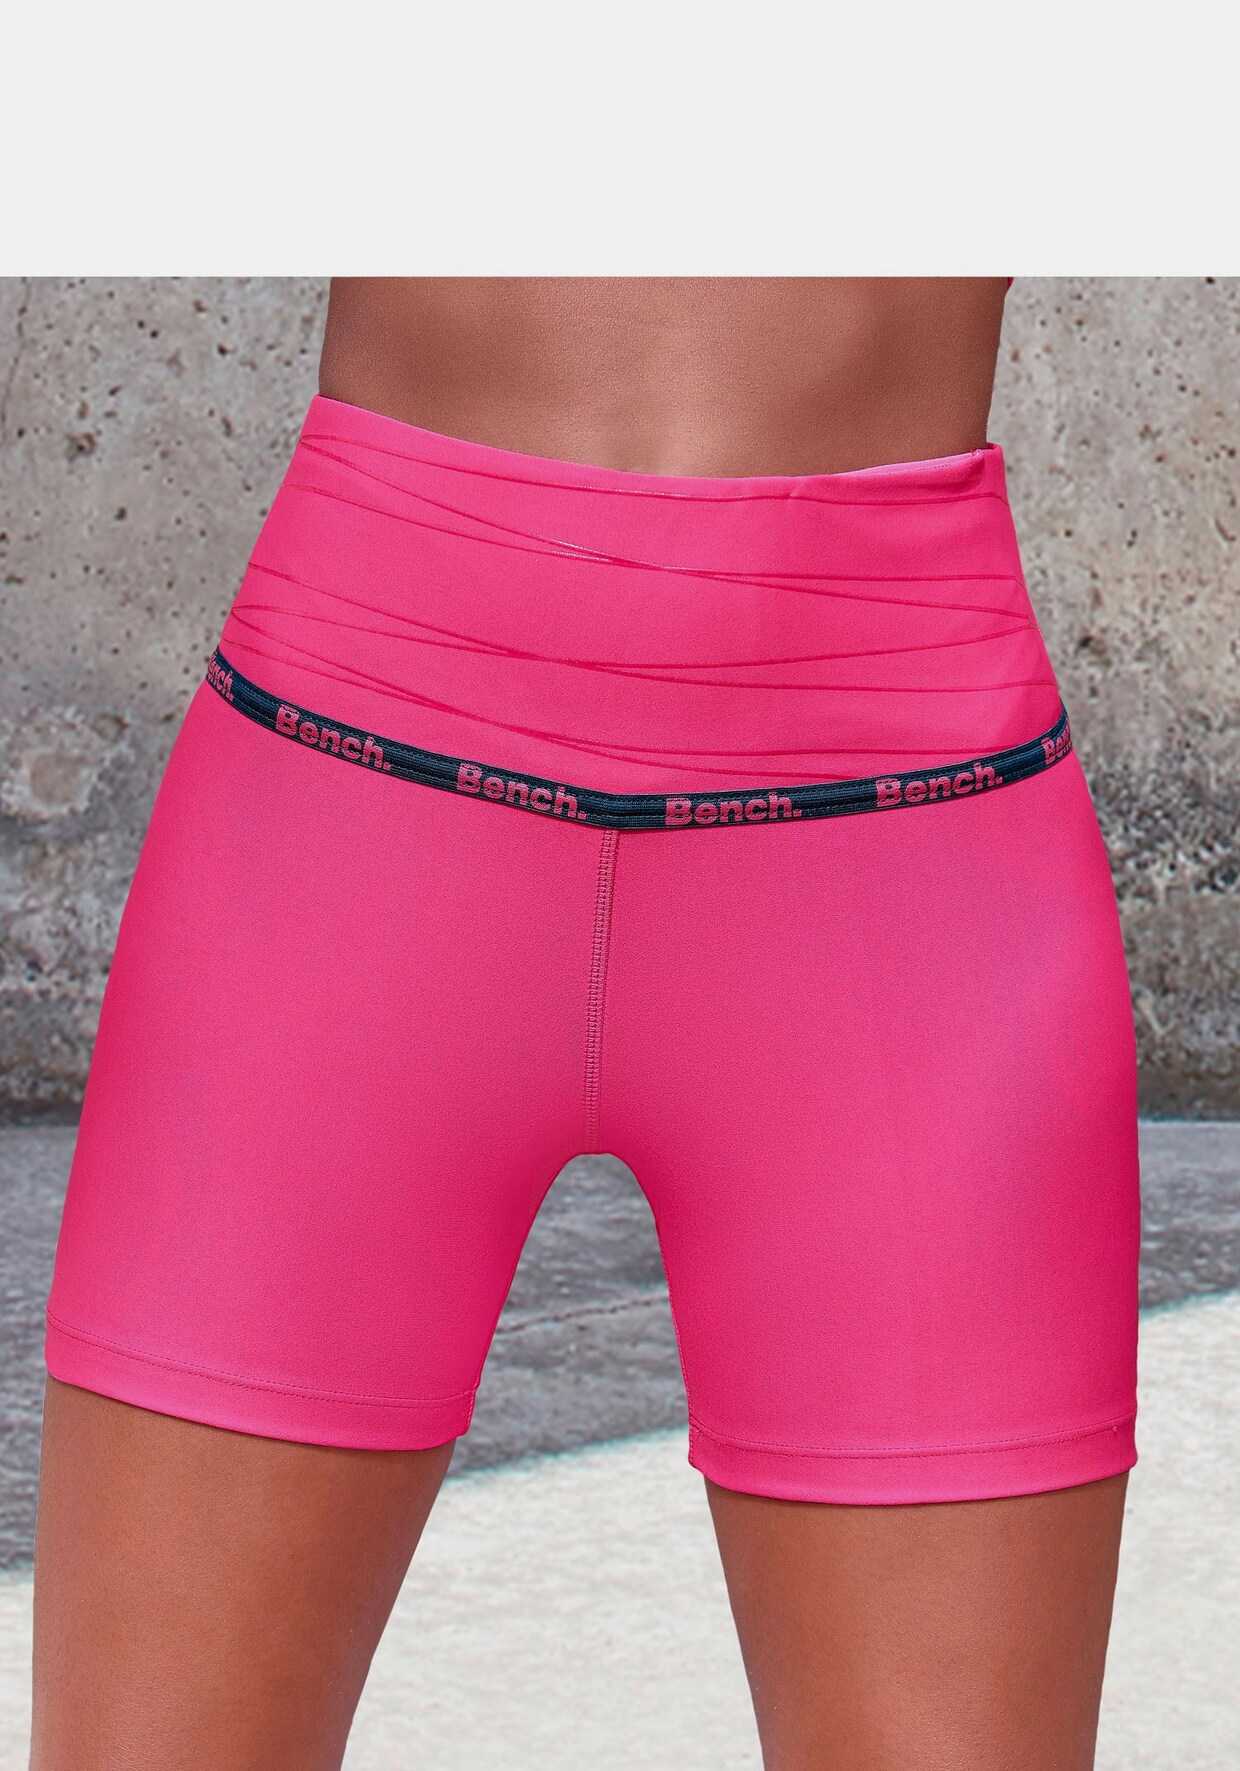 Bench. Funktionsshorts - pink